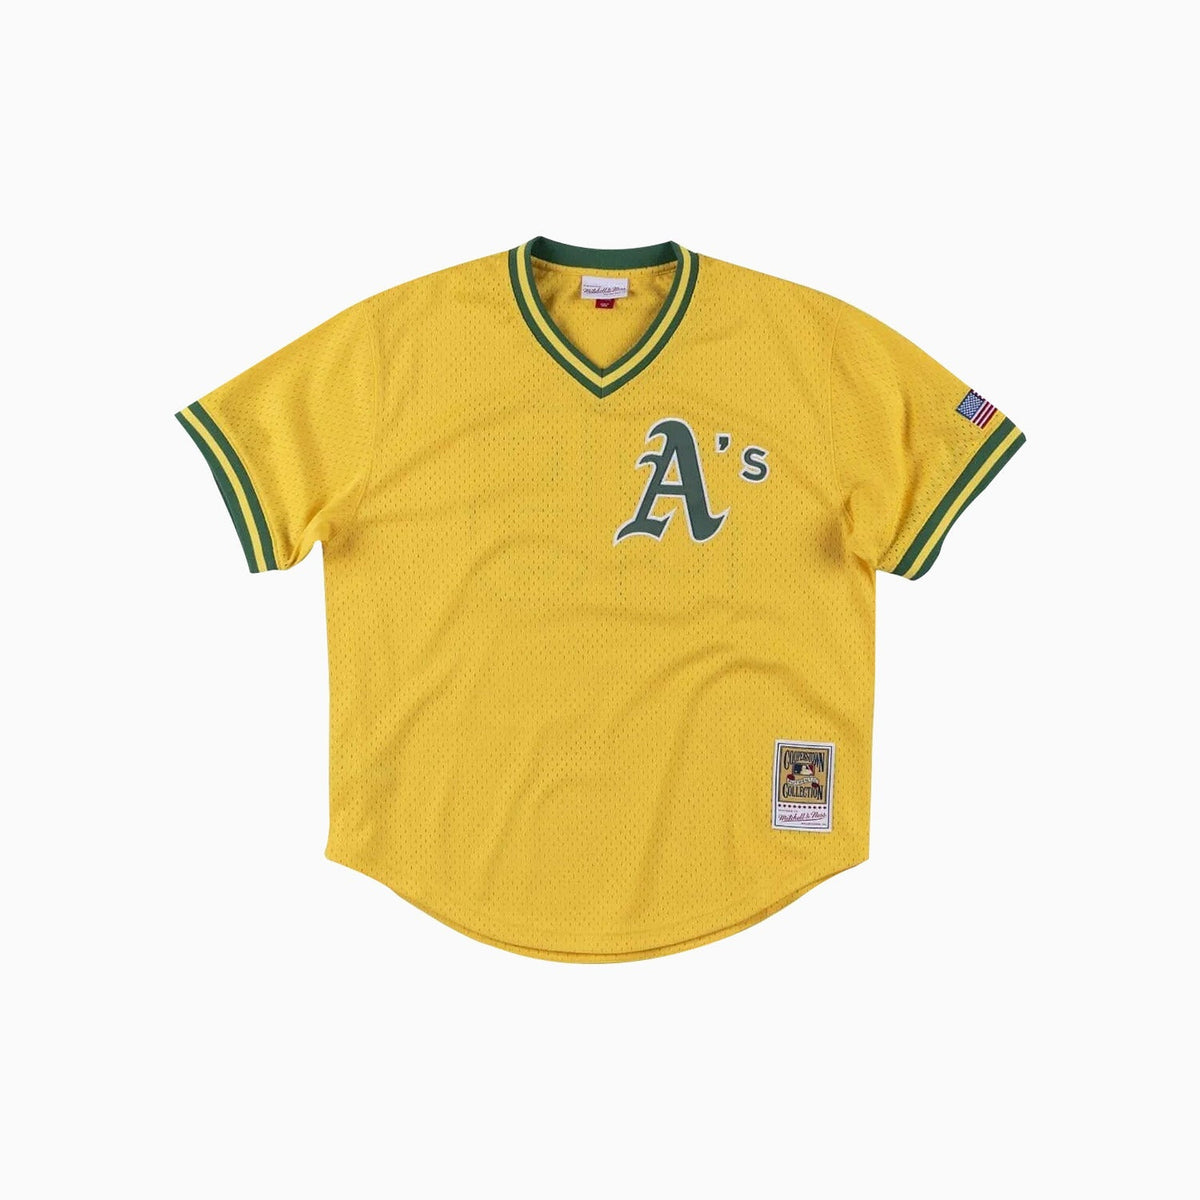 Mark McGwire Women's Oakland Athletics Home Jersey - White Authentic